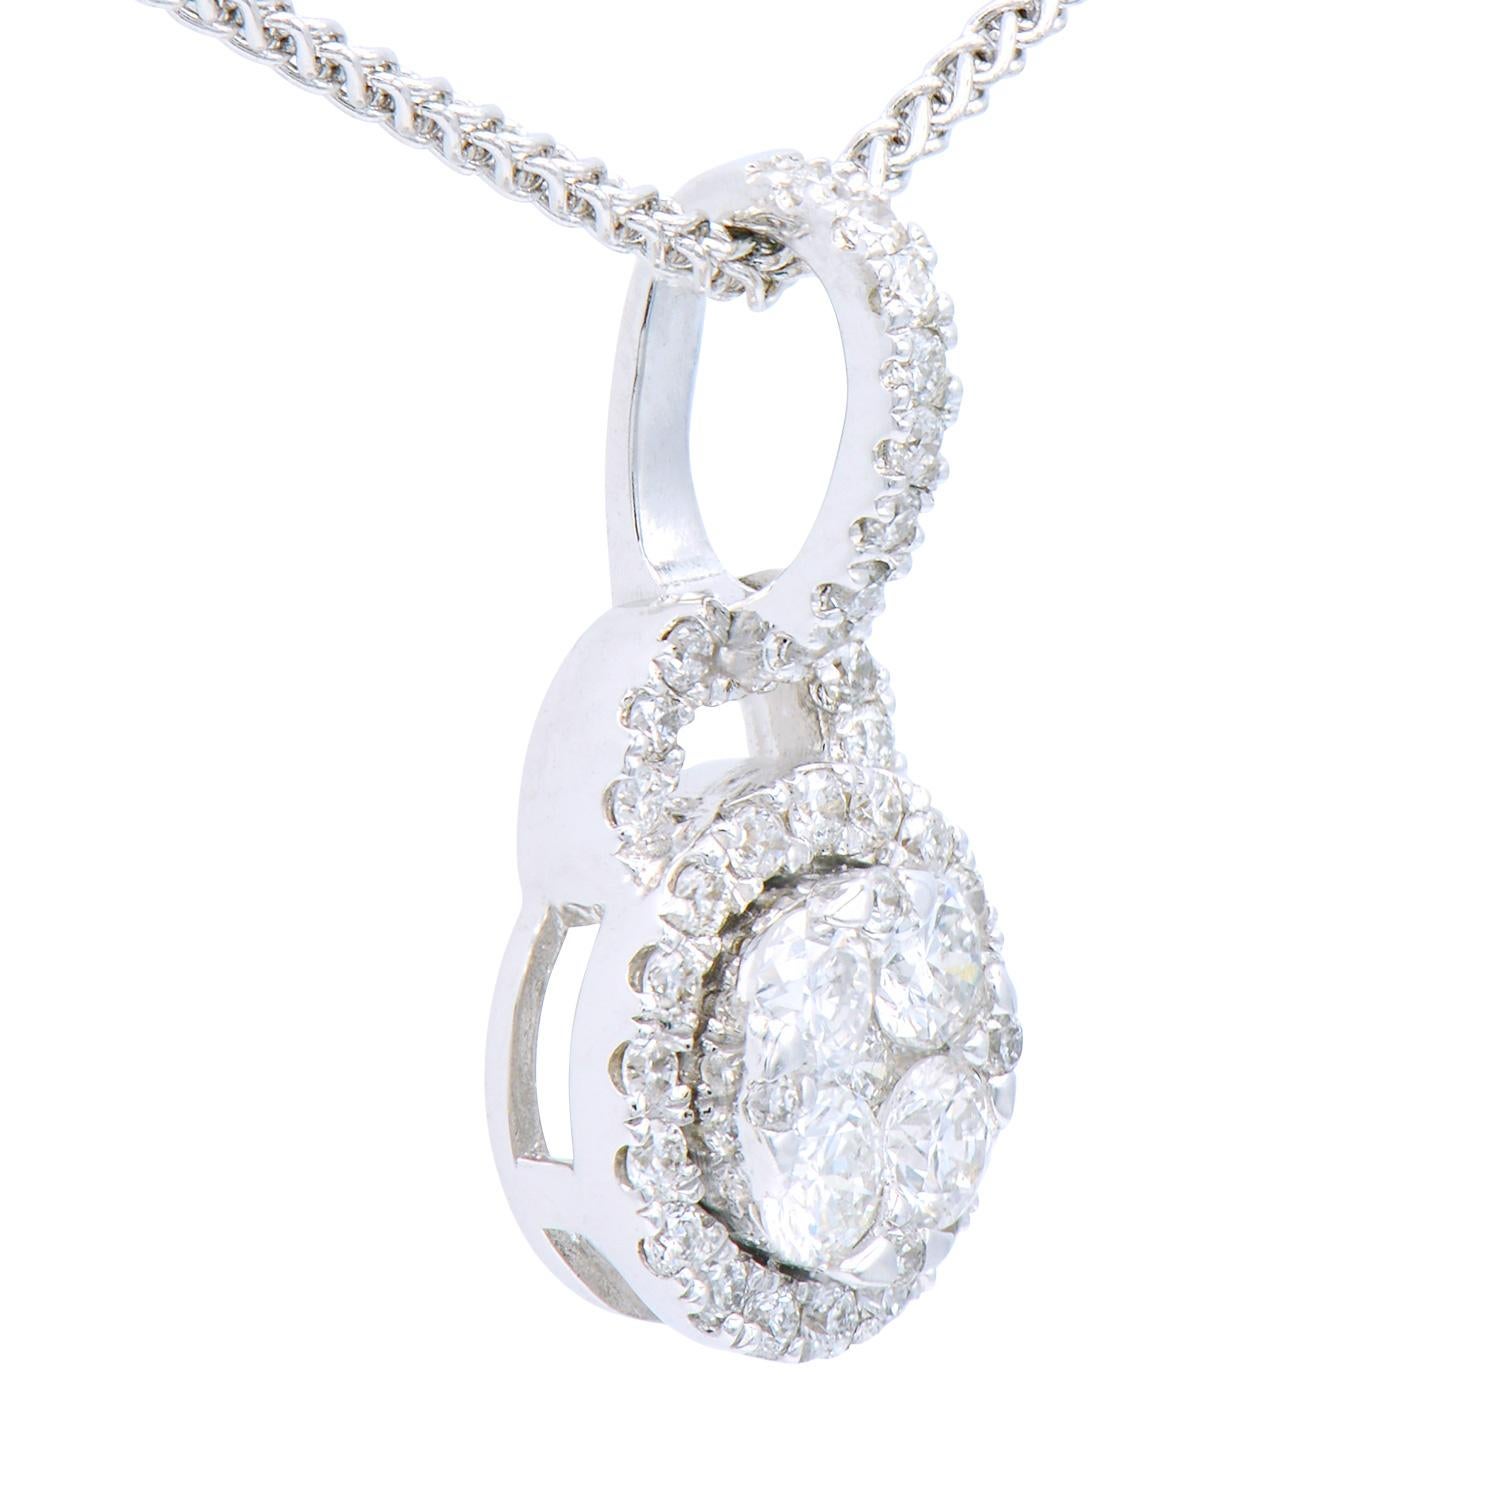 This beautiful circle pendant is made of 42 round VS2, G color diamonds totaling 0.34 carats of shining round diamonds. They are set in 1.32 grams of 18 karat white gold. This classic look is timeless and the perfect gift for any occasion.  An 18